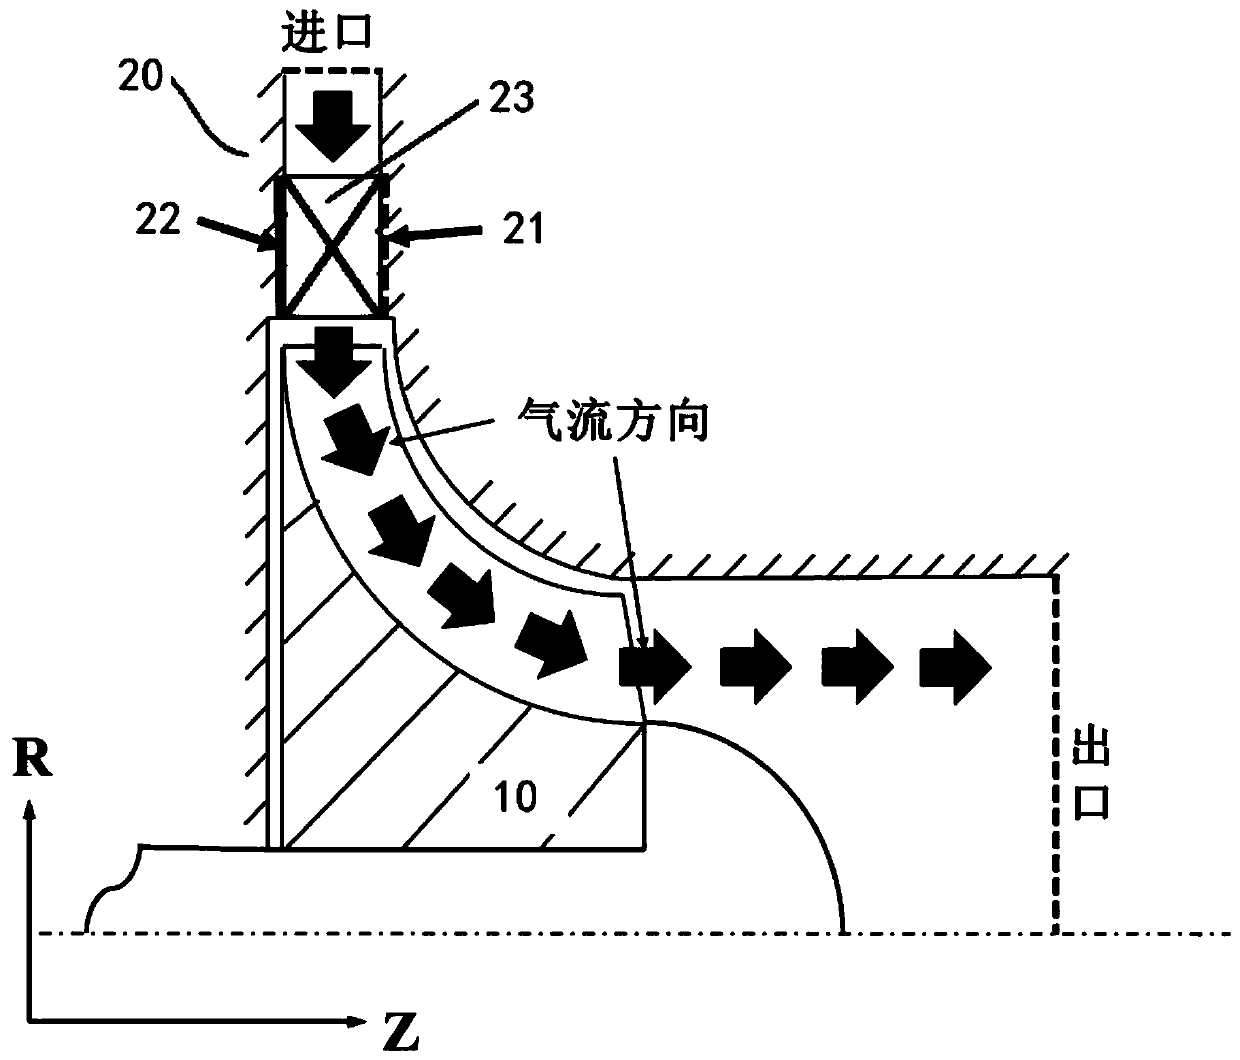 Radial flow turbine guide vane structure coupled with non-axisymmetric end walls